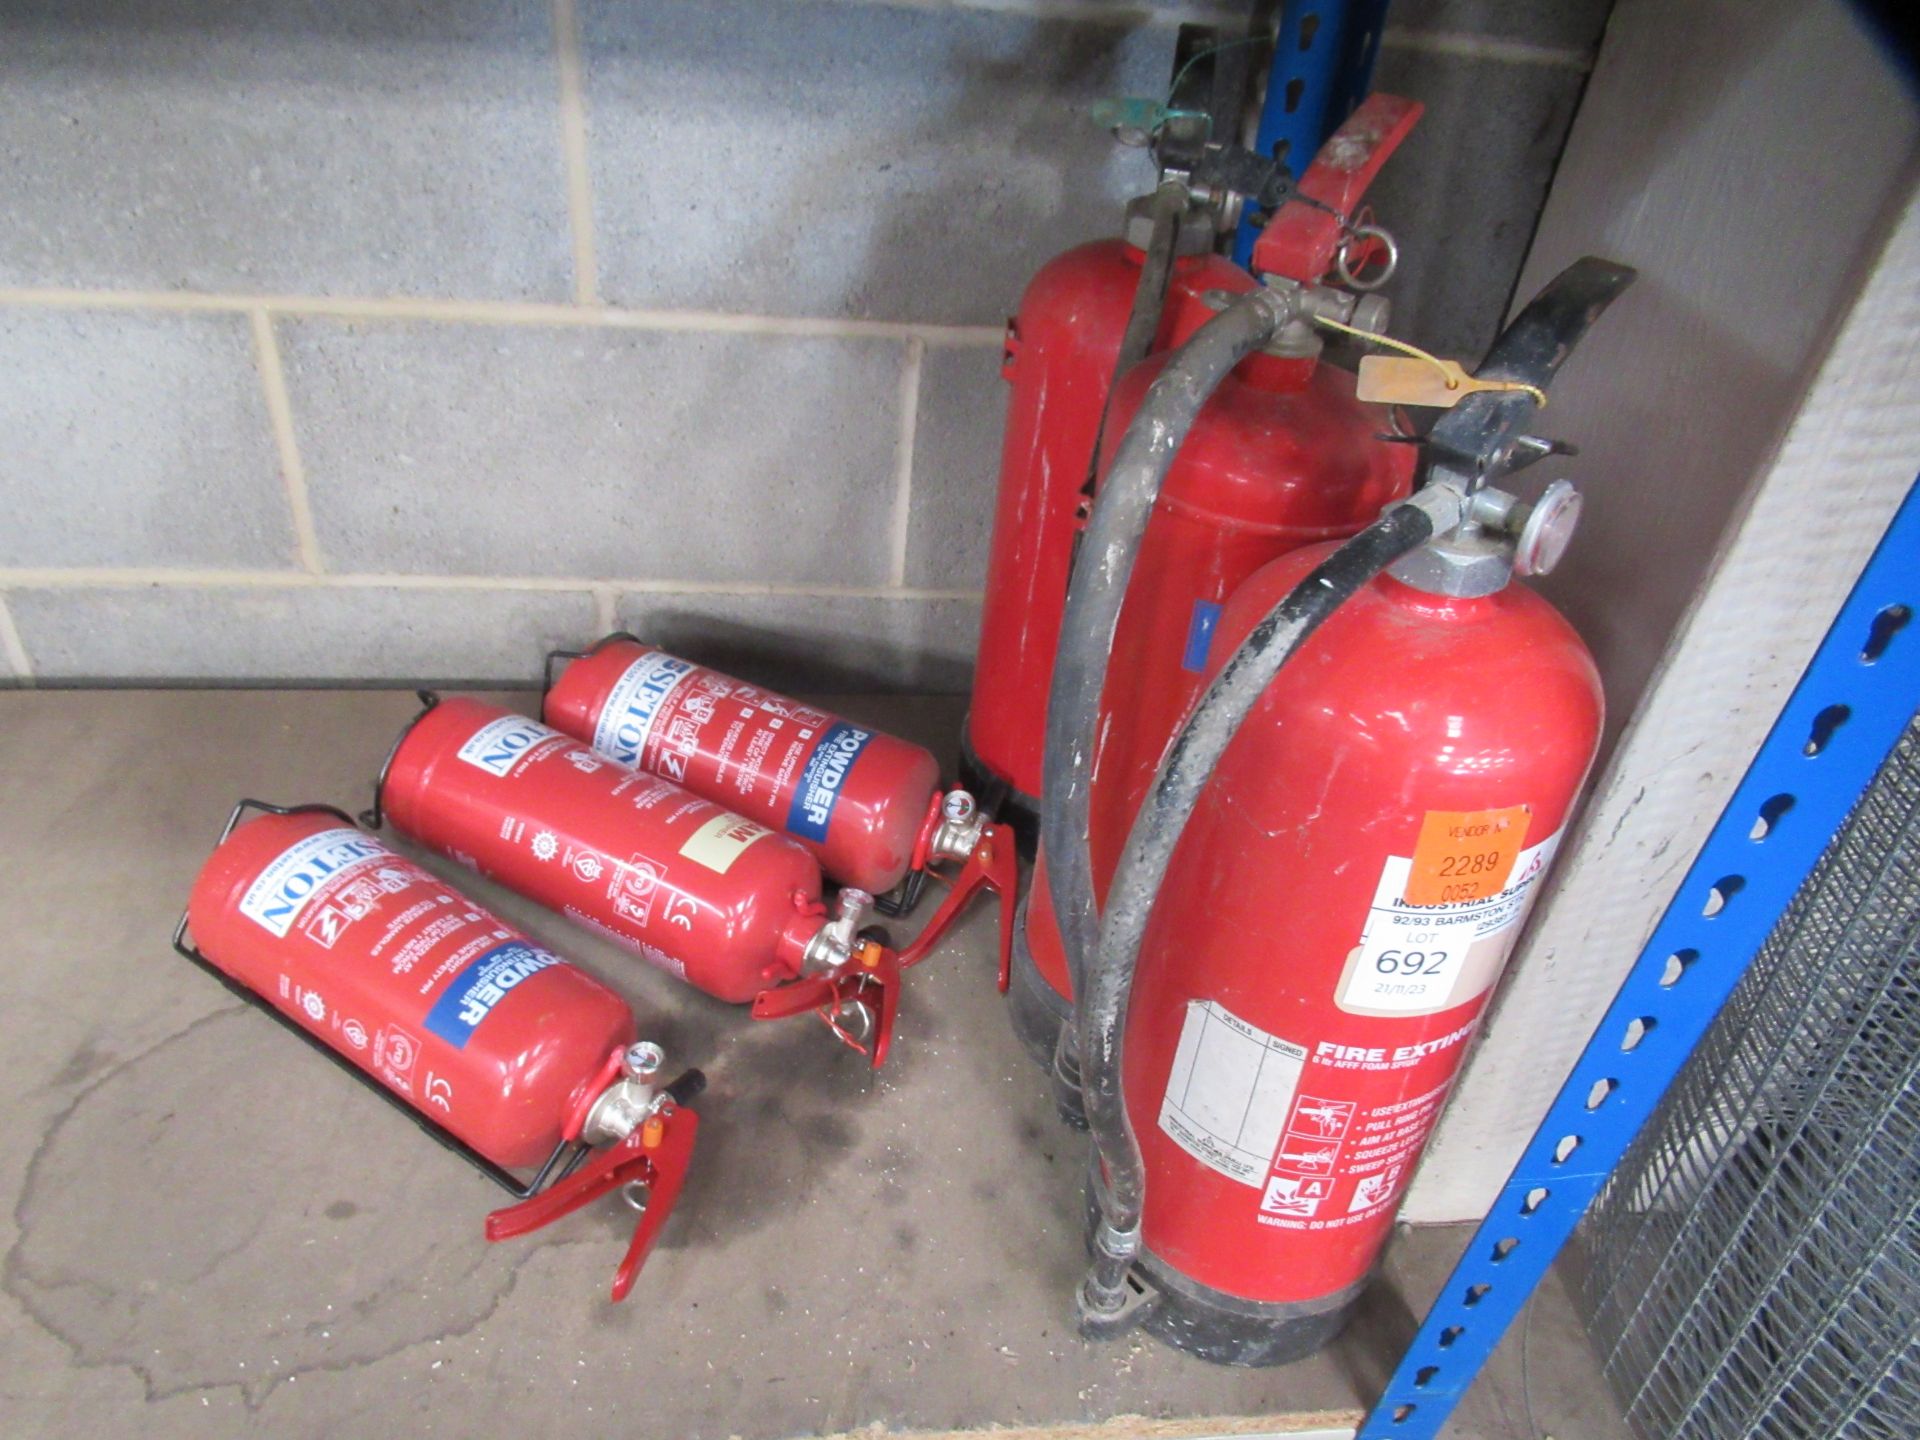 6x Various Fire Extinguishers